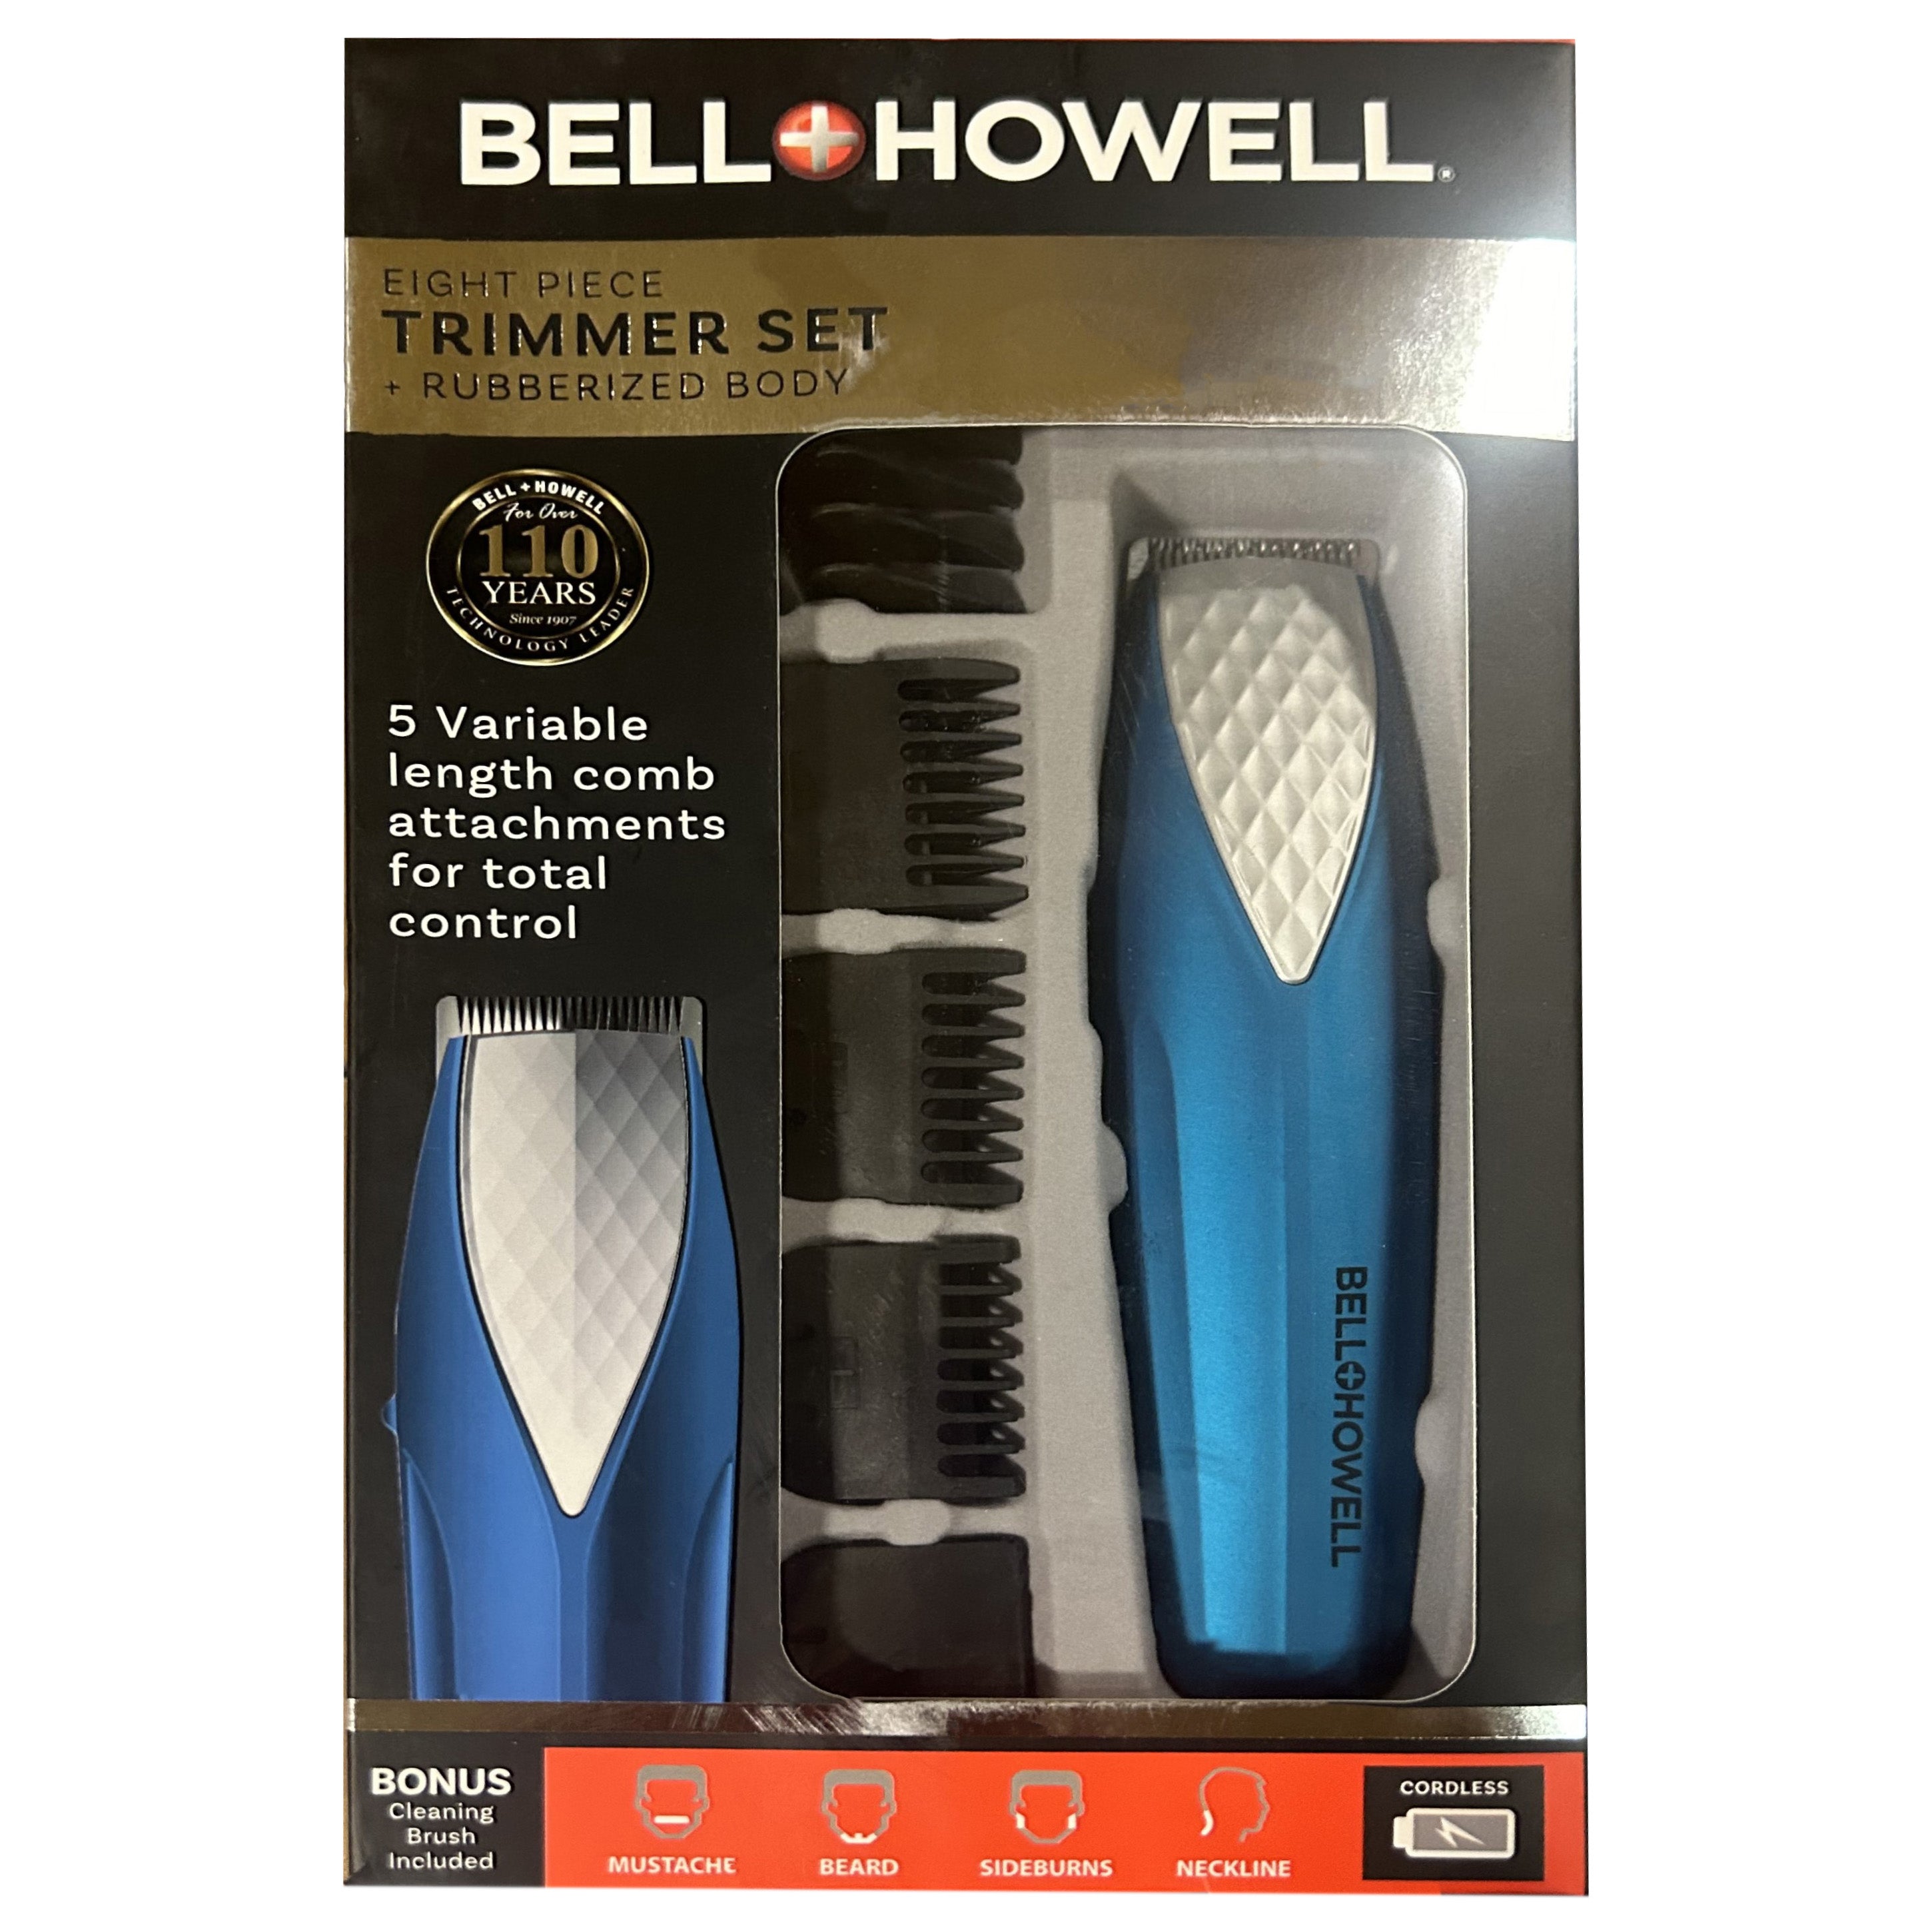 Bell & Howell Eight Piece Cordless Trimmer Set + Rubberized Body (Blue)